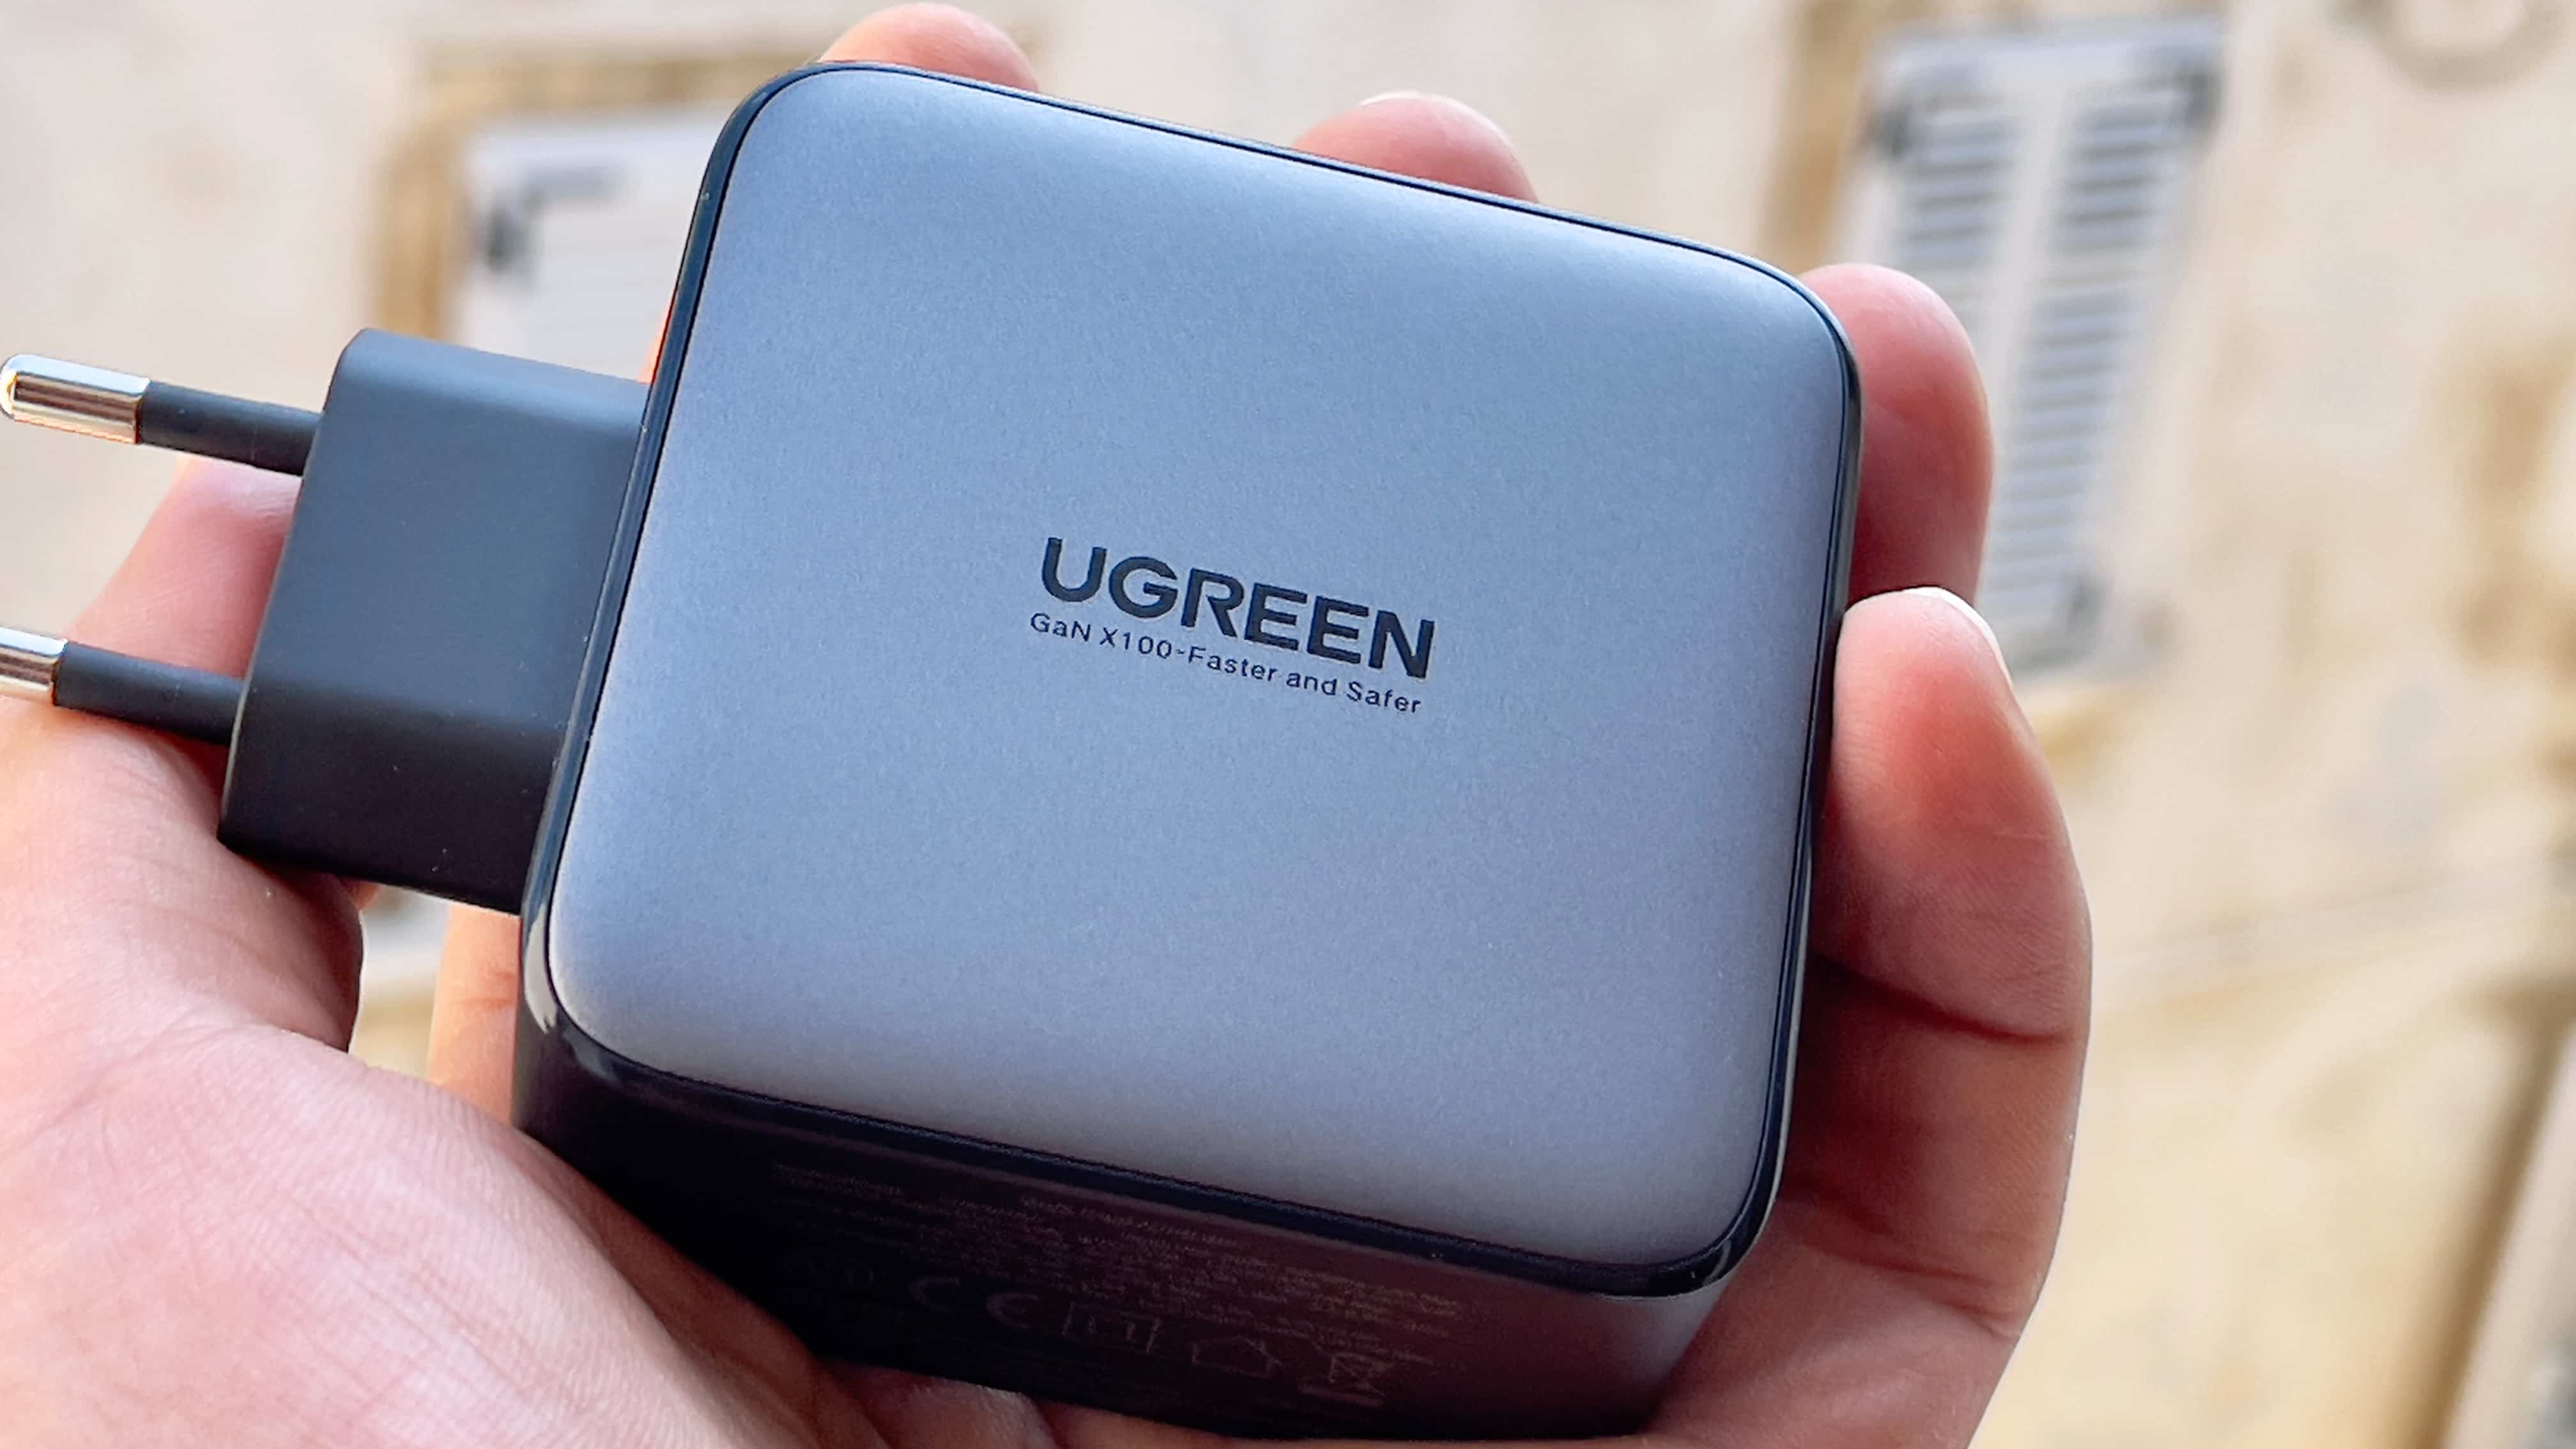 A male hand holding Ugreen's 100-watt Nexus power adapter, showing a Ugreen logo with the tagline "GaN X100-Faster and Safer" printed on the back of the casing